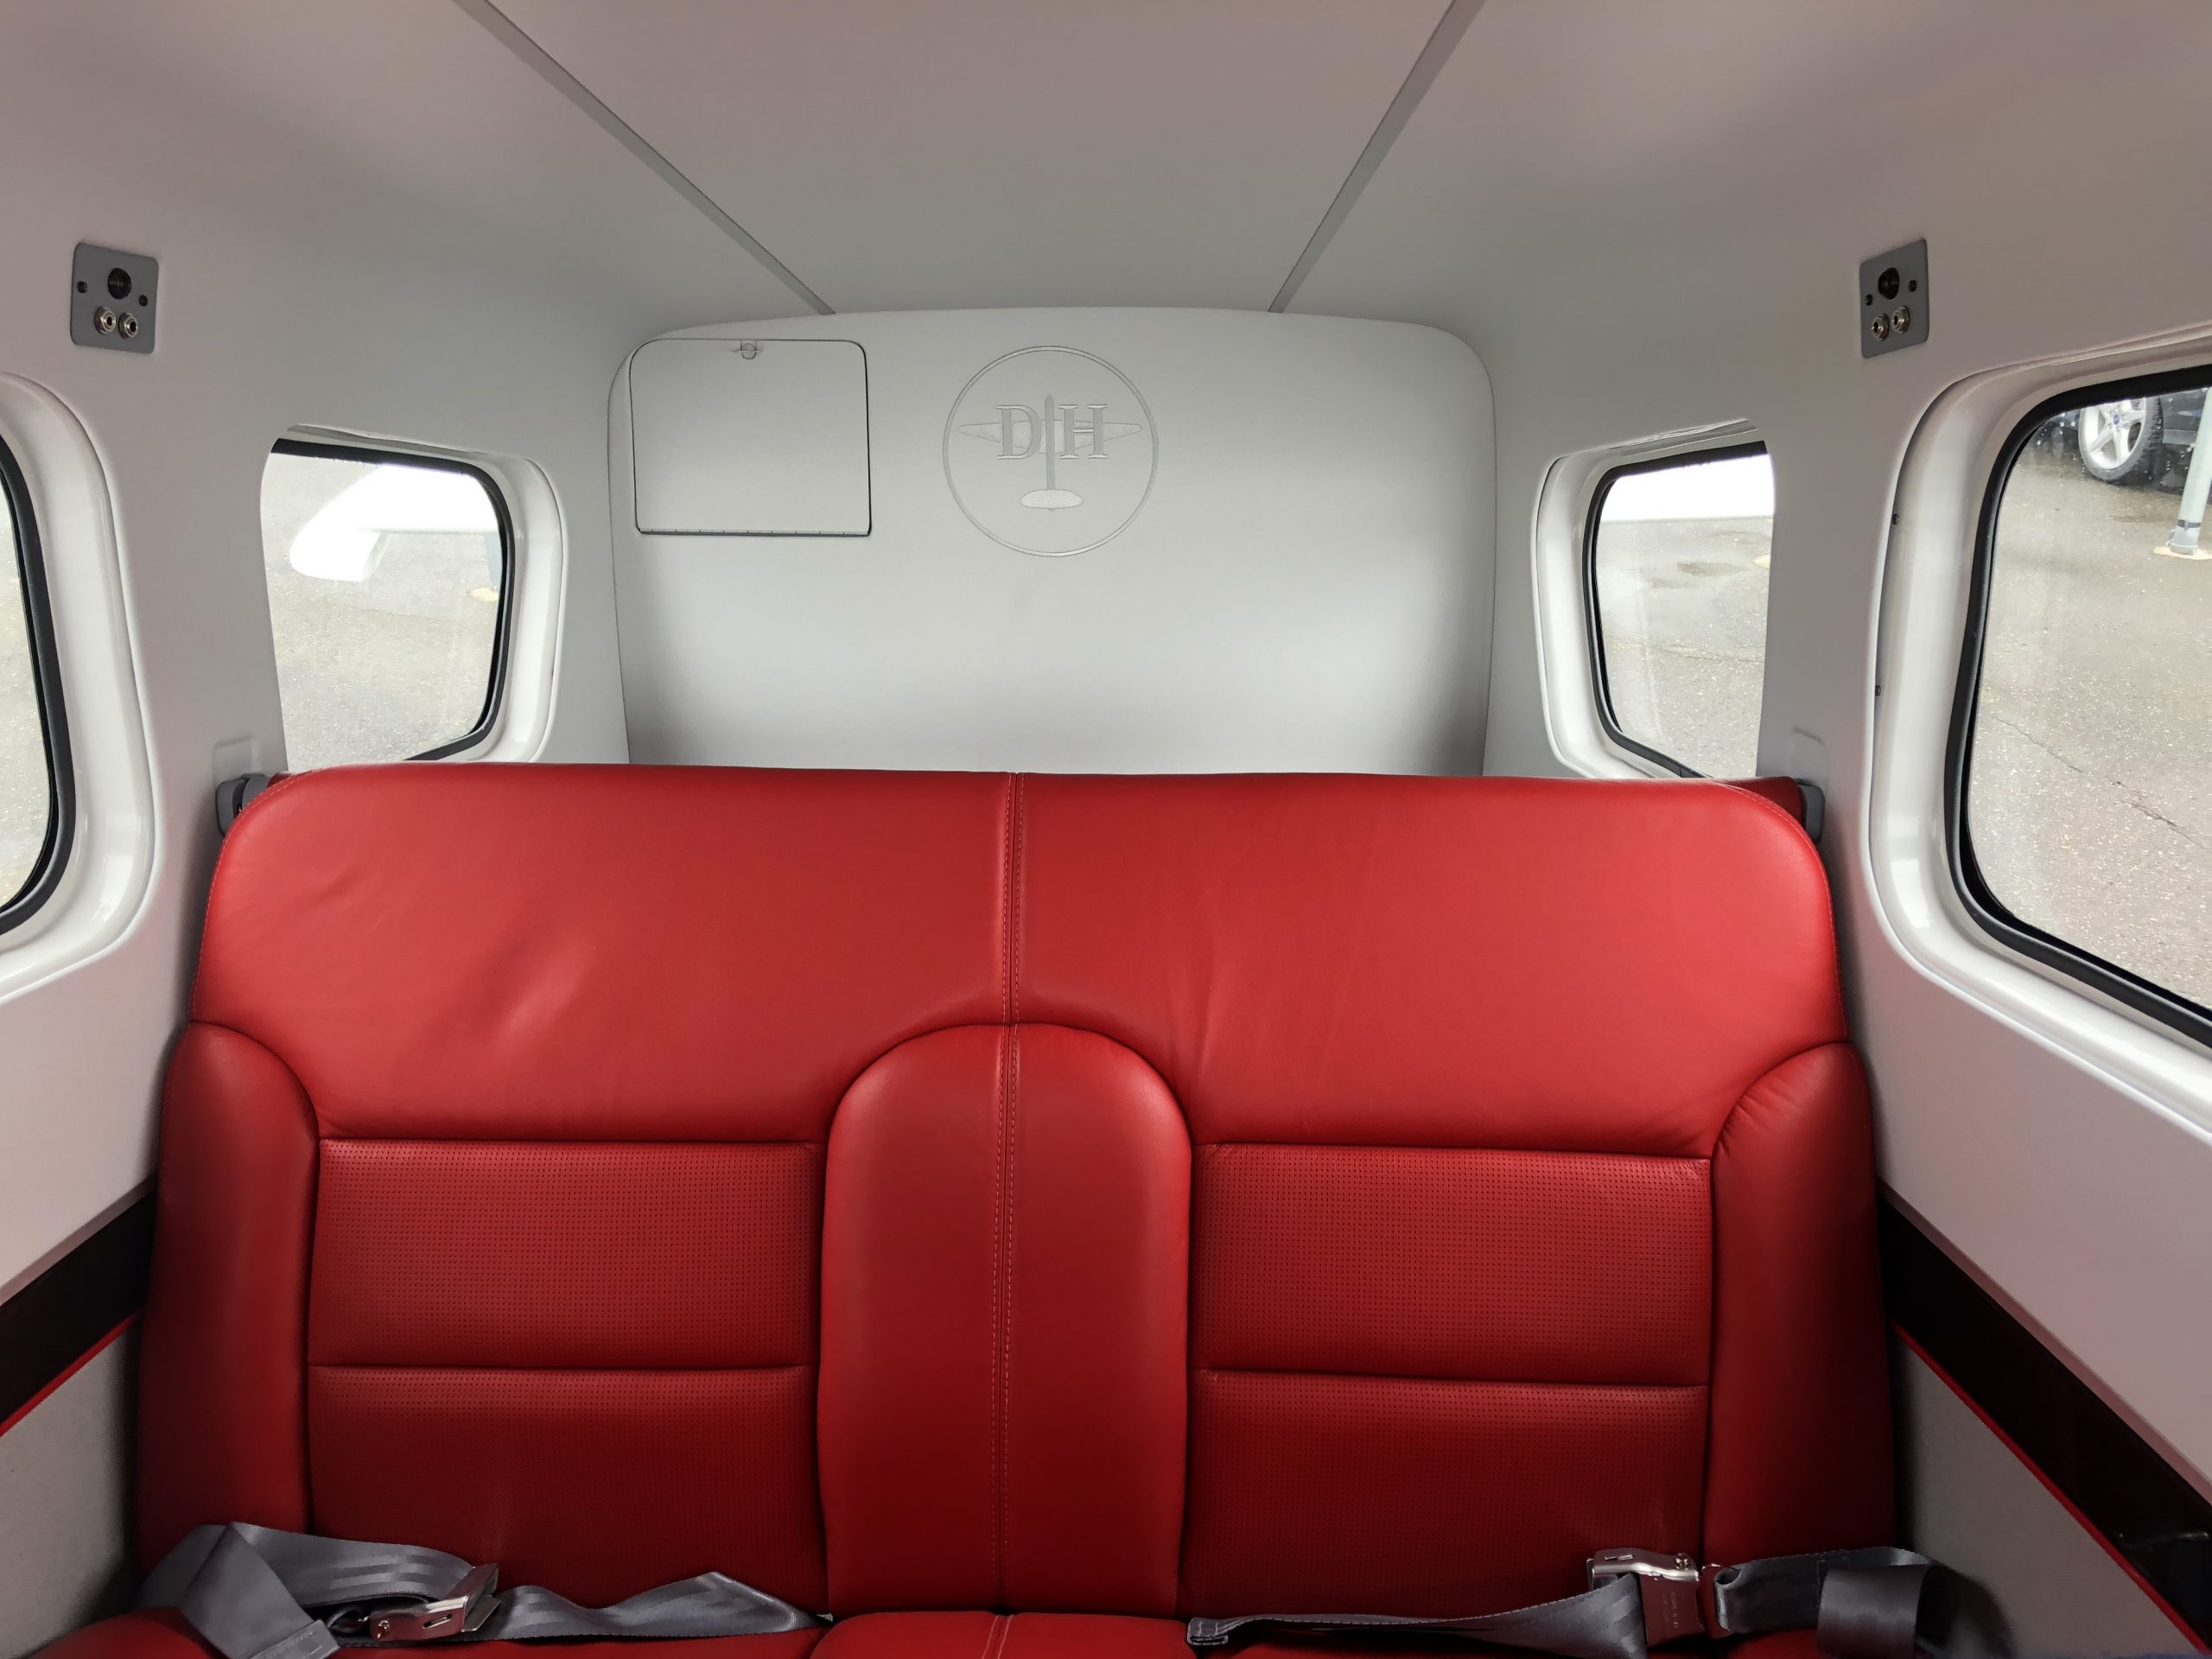 The Bright Red Leather Seats